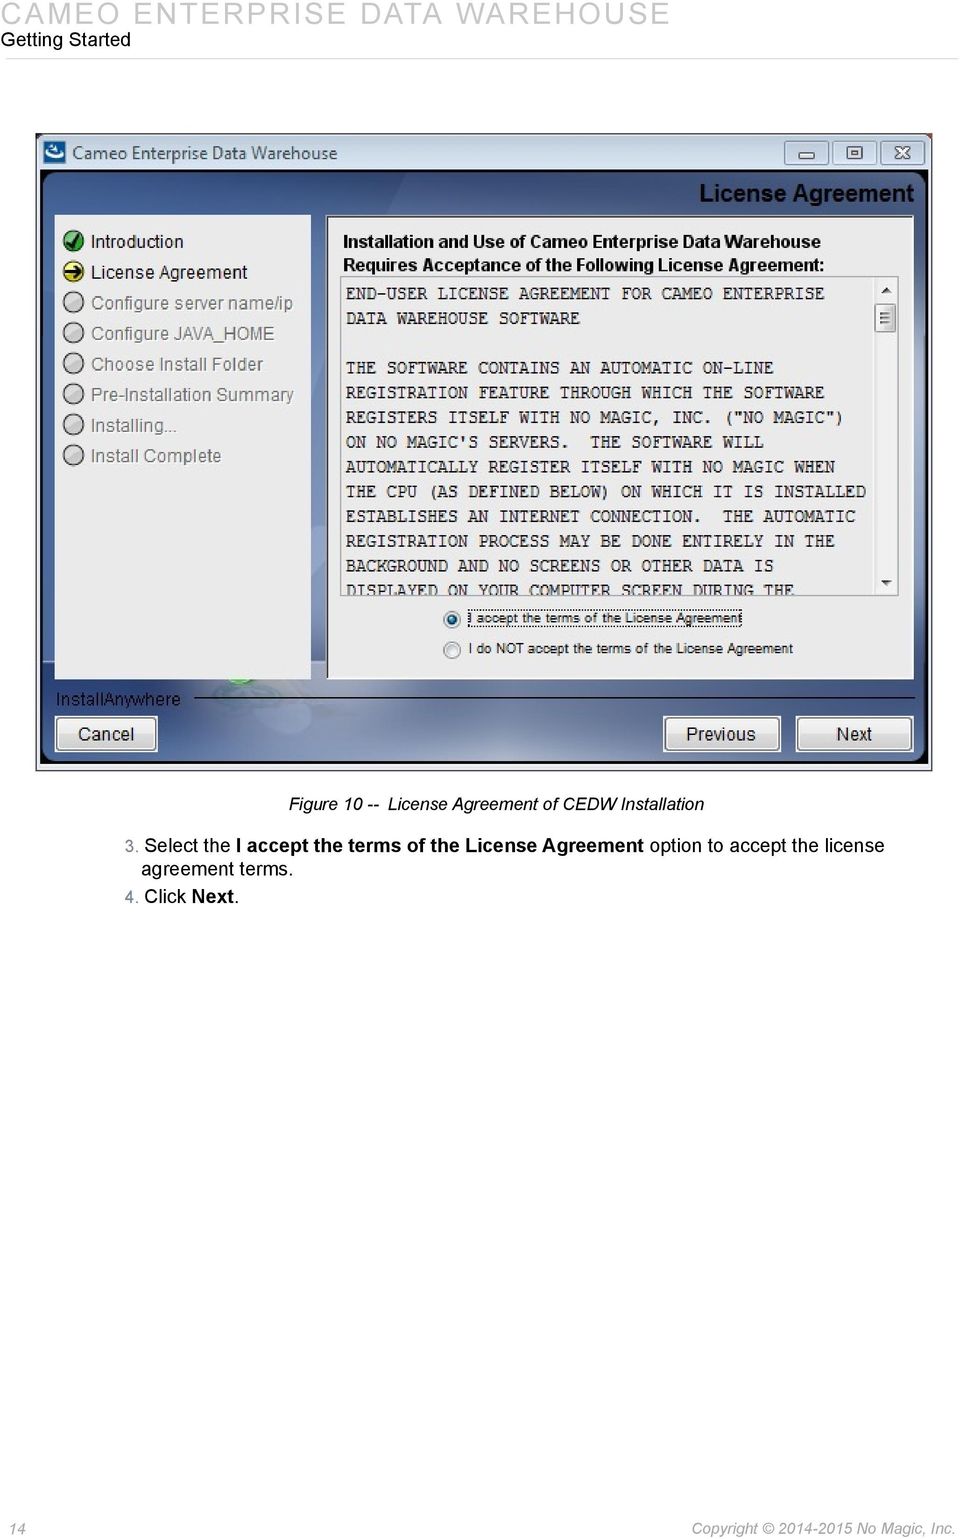 Select the I accept the terms of the License Agreement